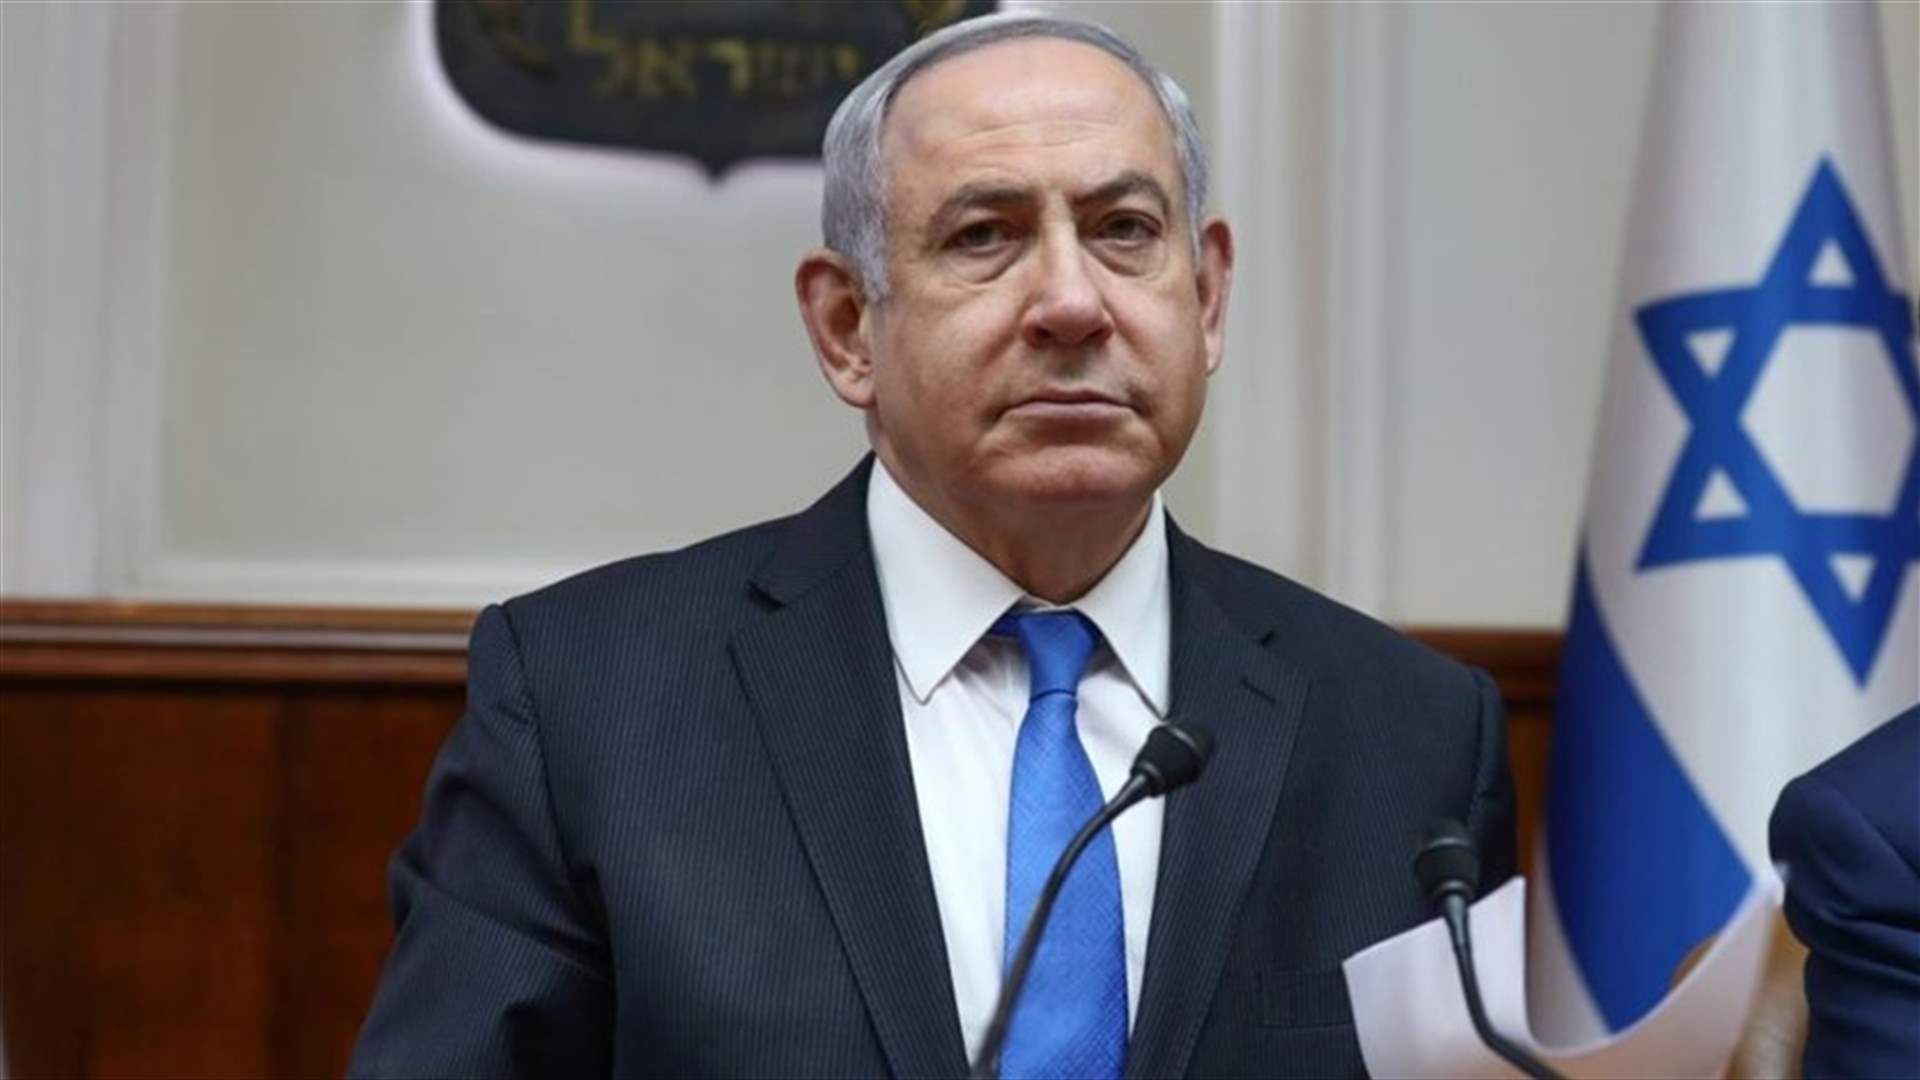 Netanyahu&#39;s trial to begin on March 17 - Israeli Justice Ministry